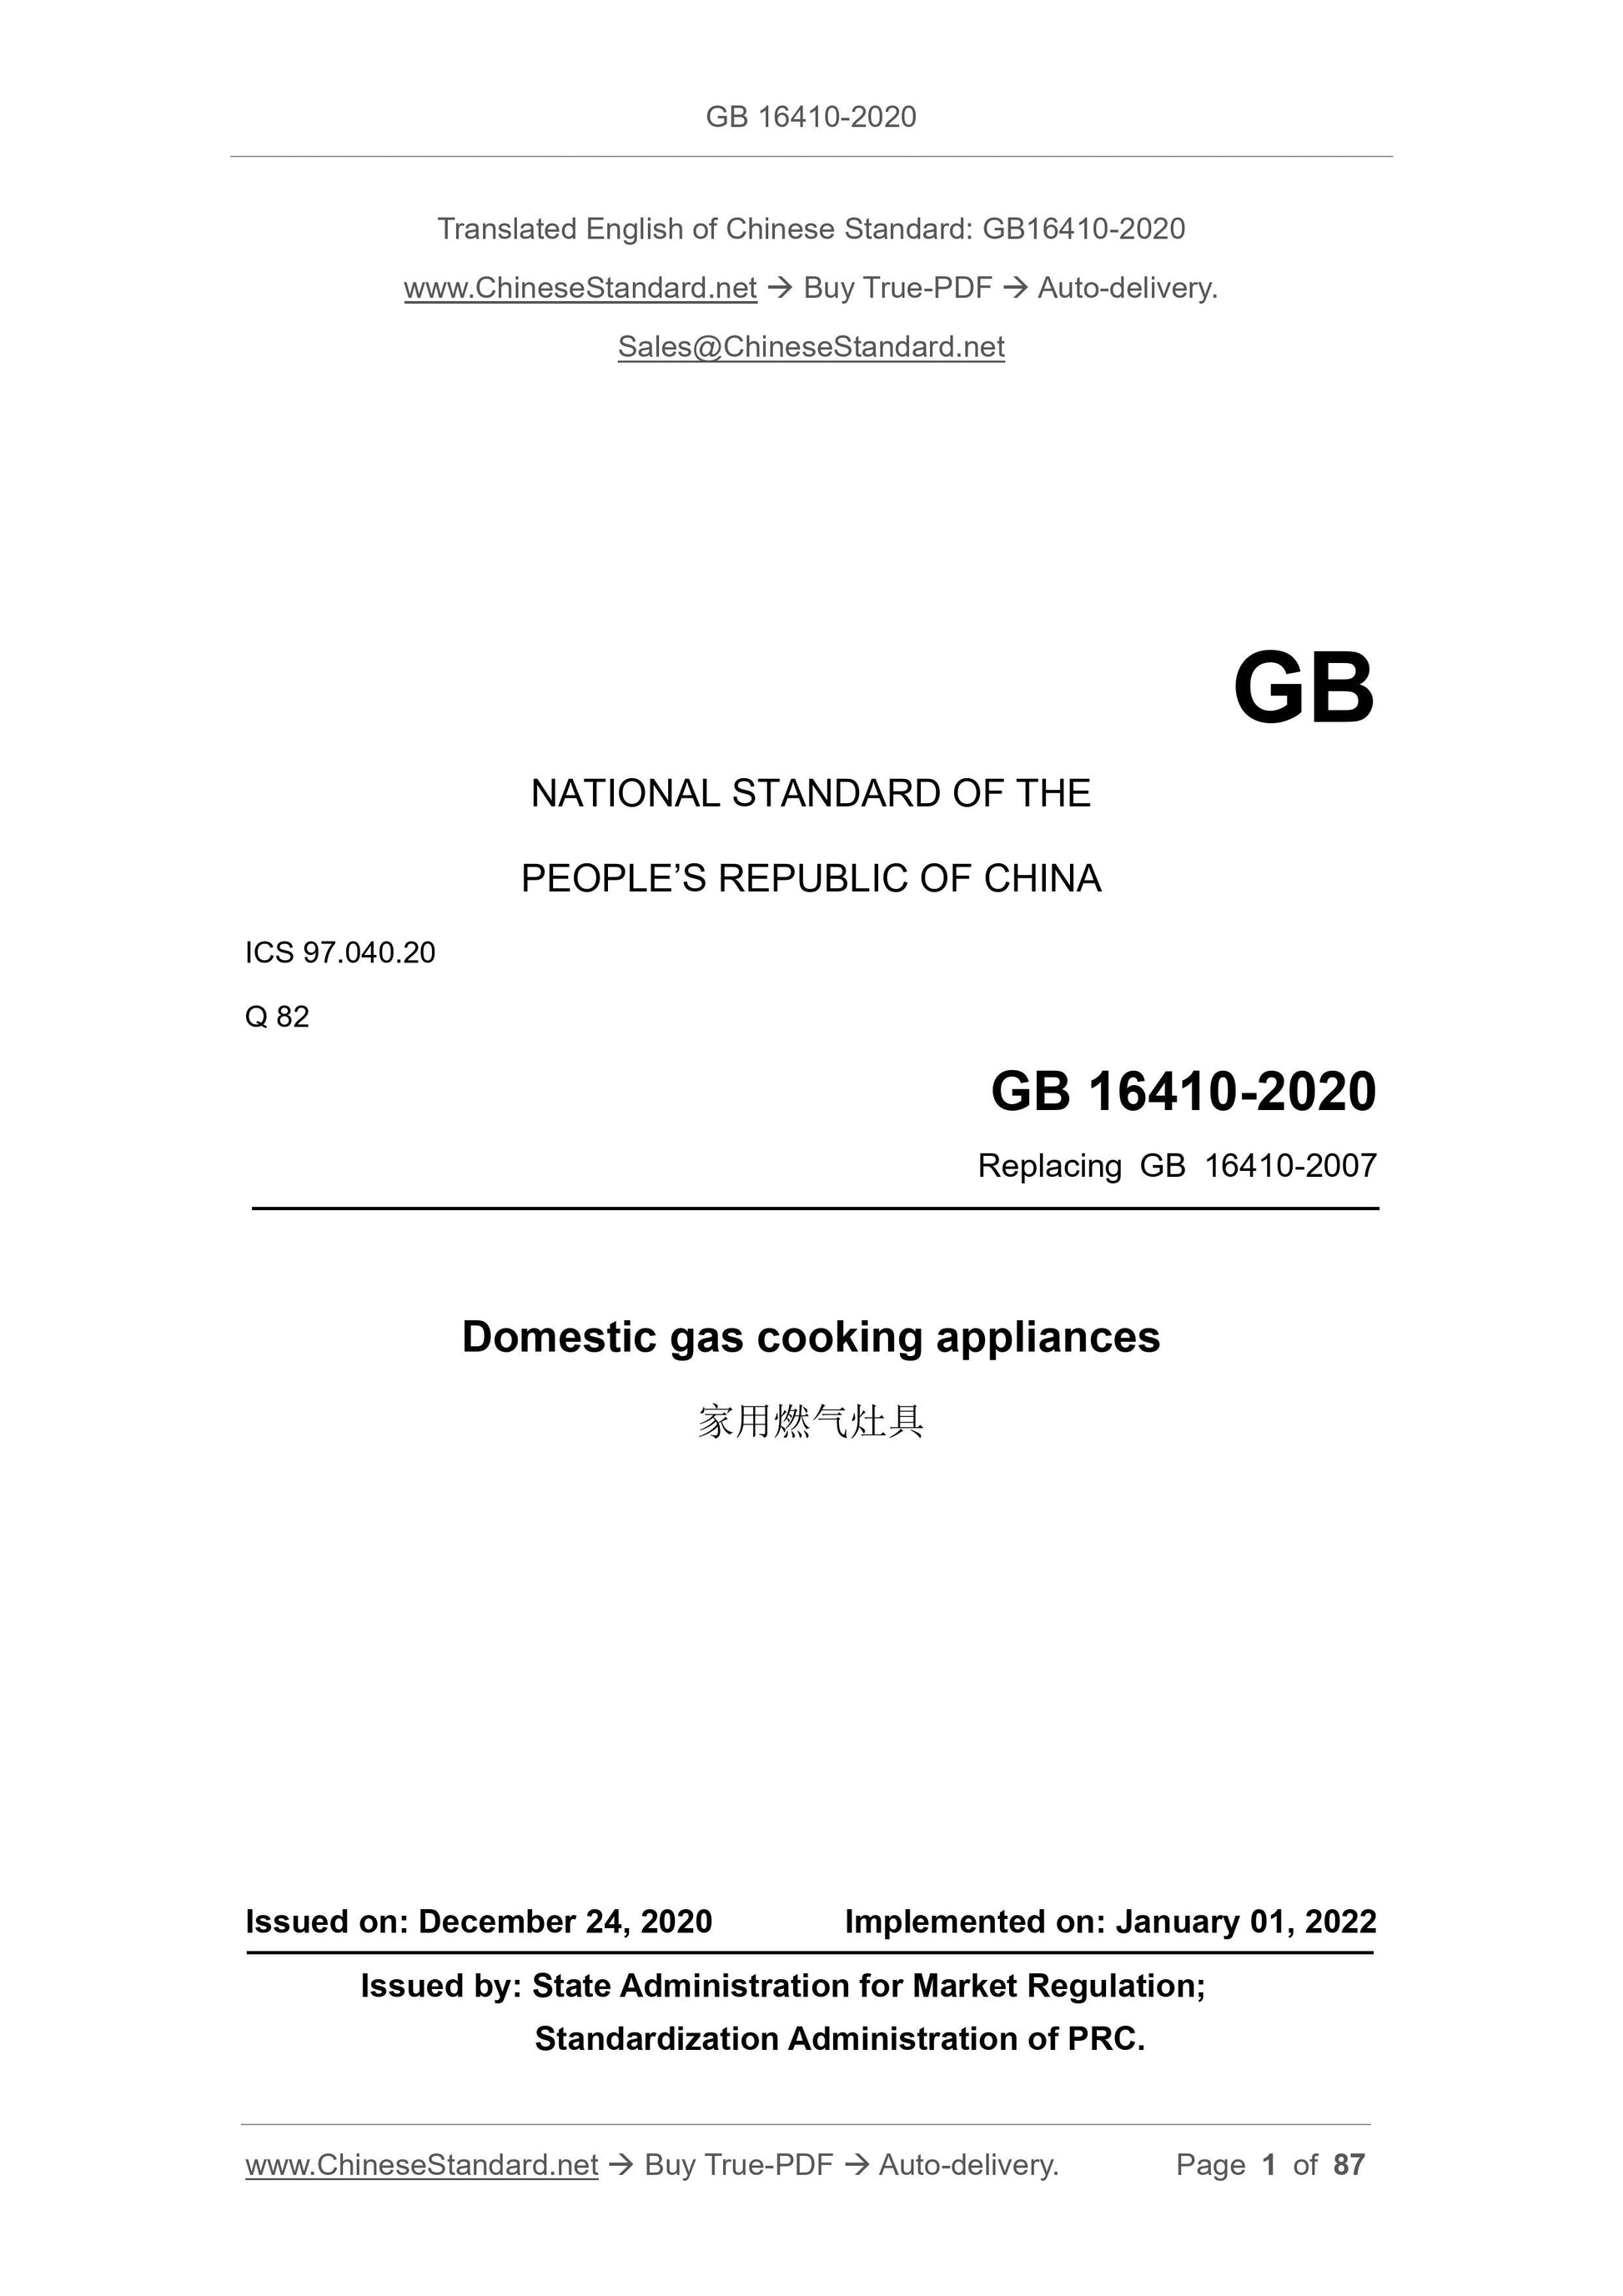 GB 16410-2020 Page 1